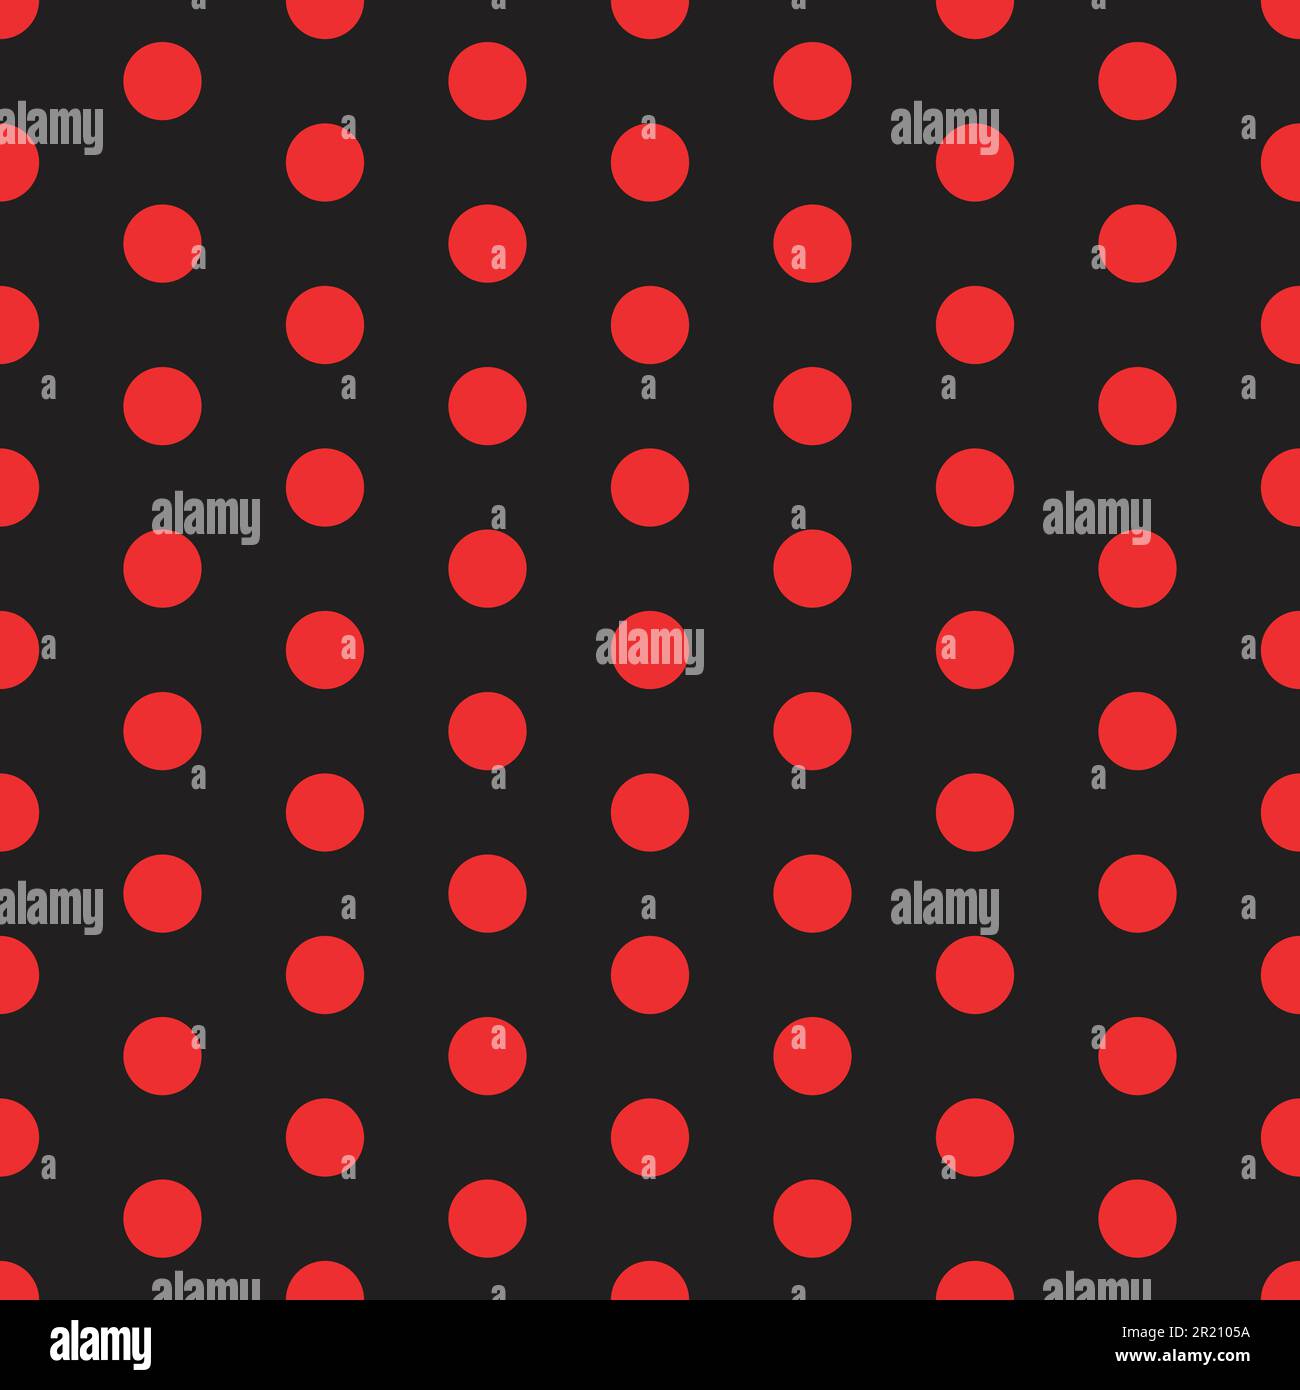 Red and Black Polka Dot Pattern Stock Vector